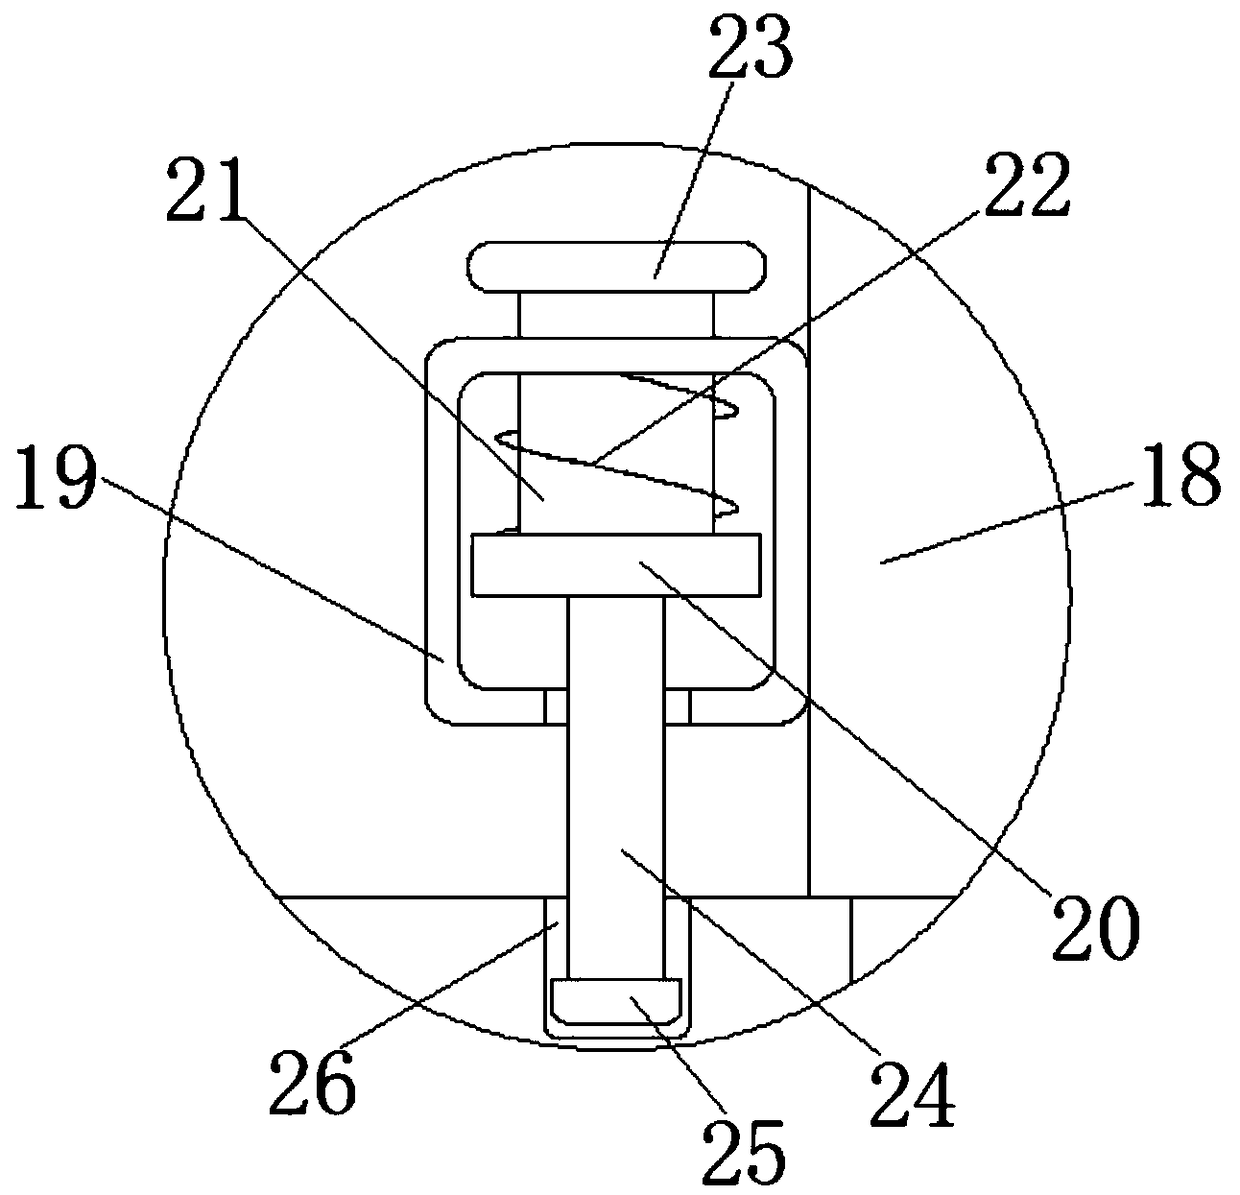 Building tool transport device based on fabricated building